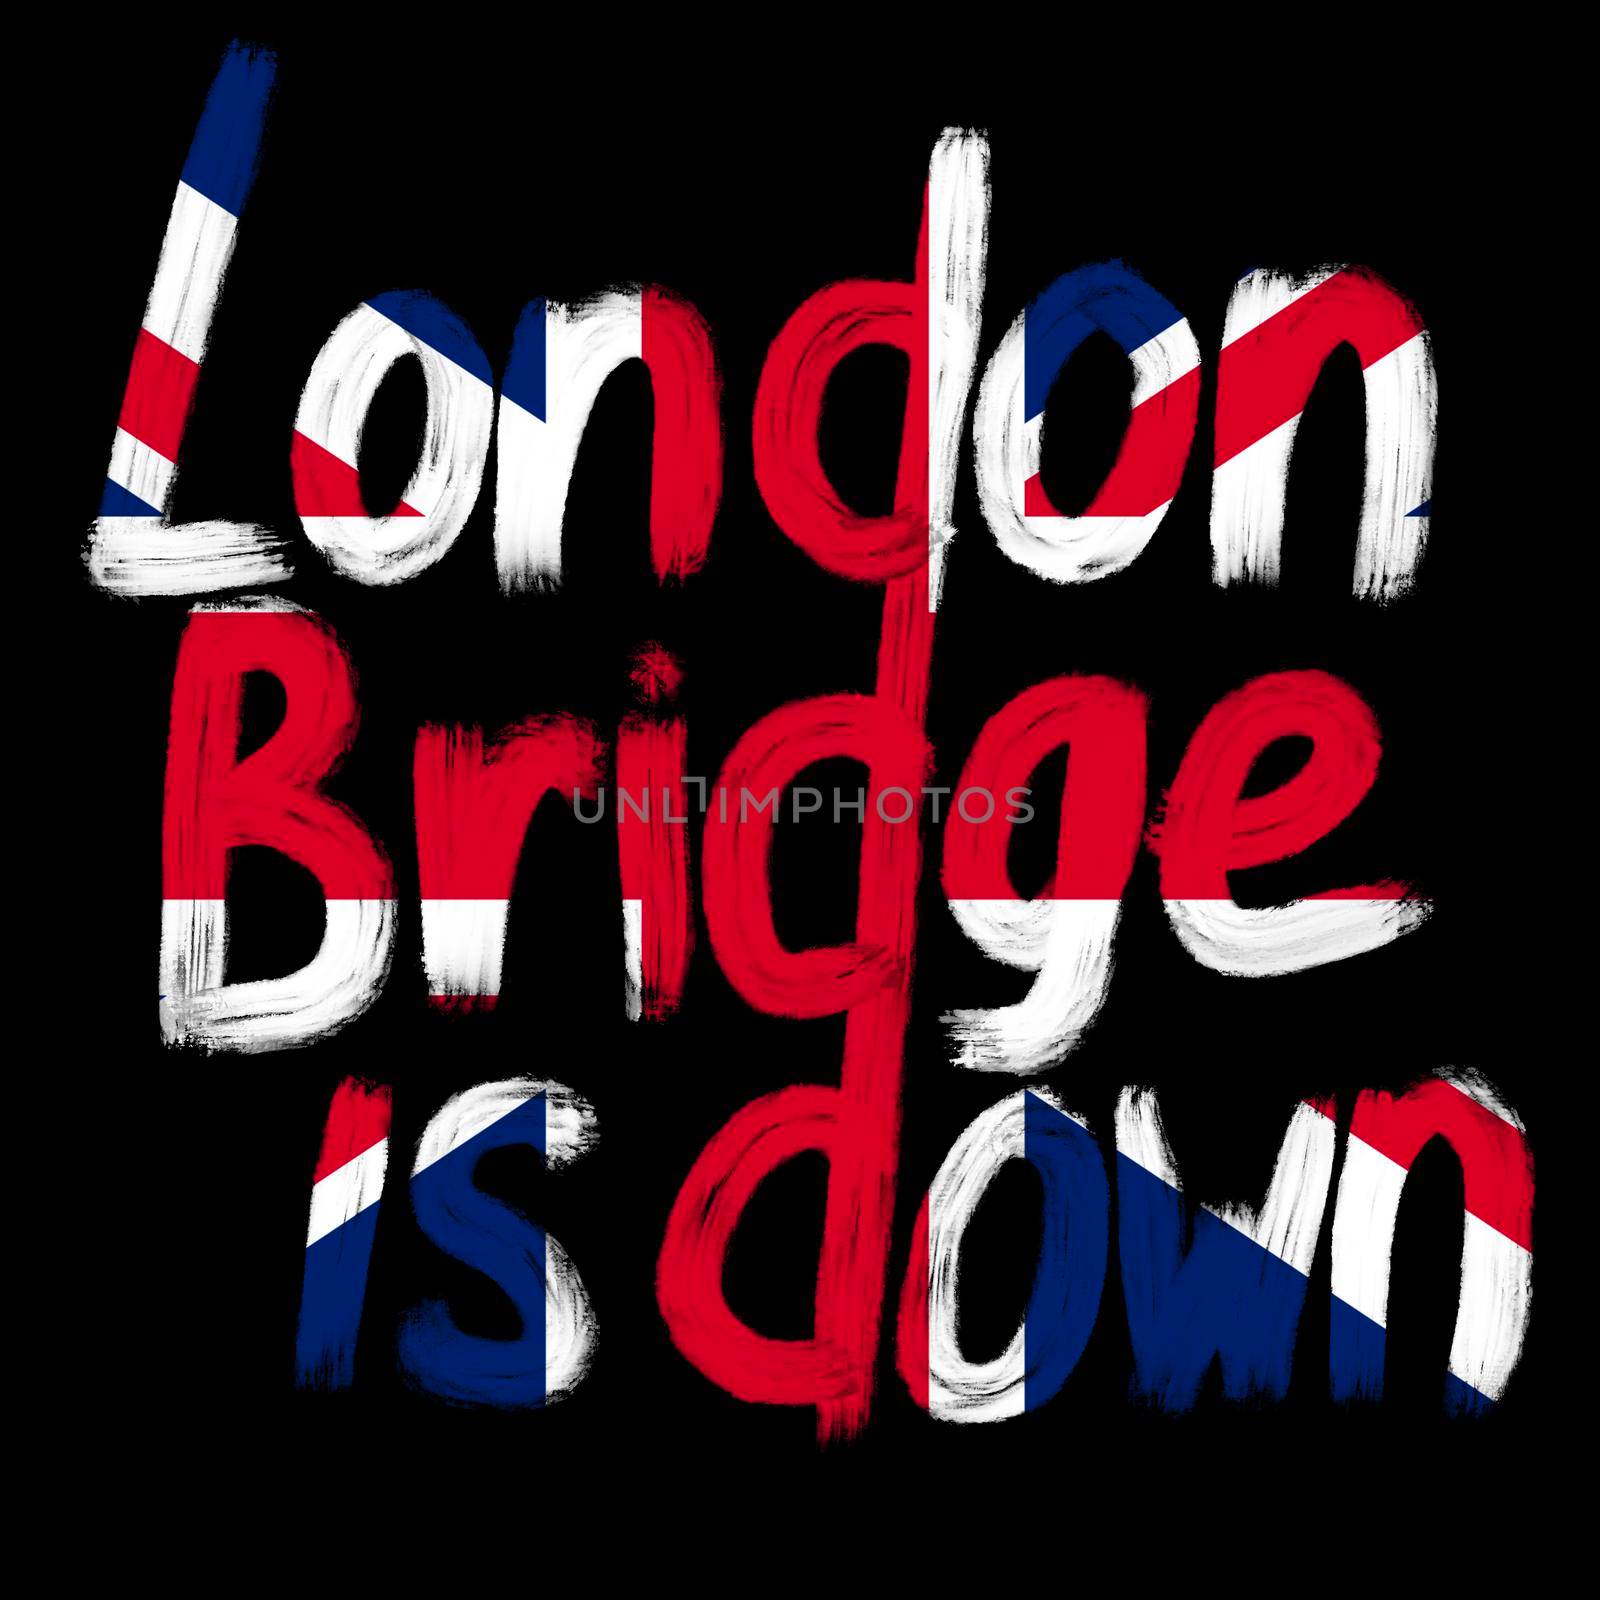 London bridge is down phrase illustration, code phrase for elizabeth II death funeral. British monarch burial name, hand written message words lettering, graffiti style illustration poster art. by Lagmar